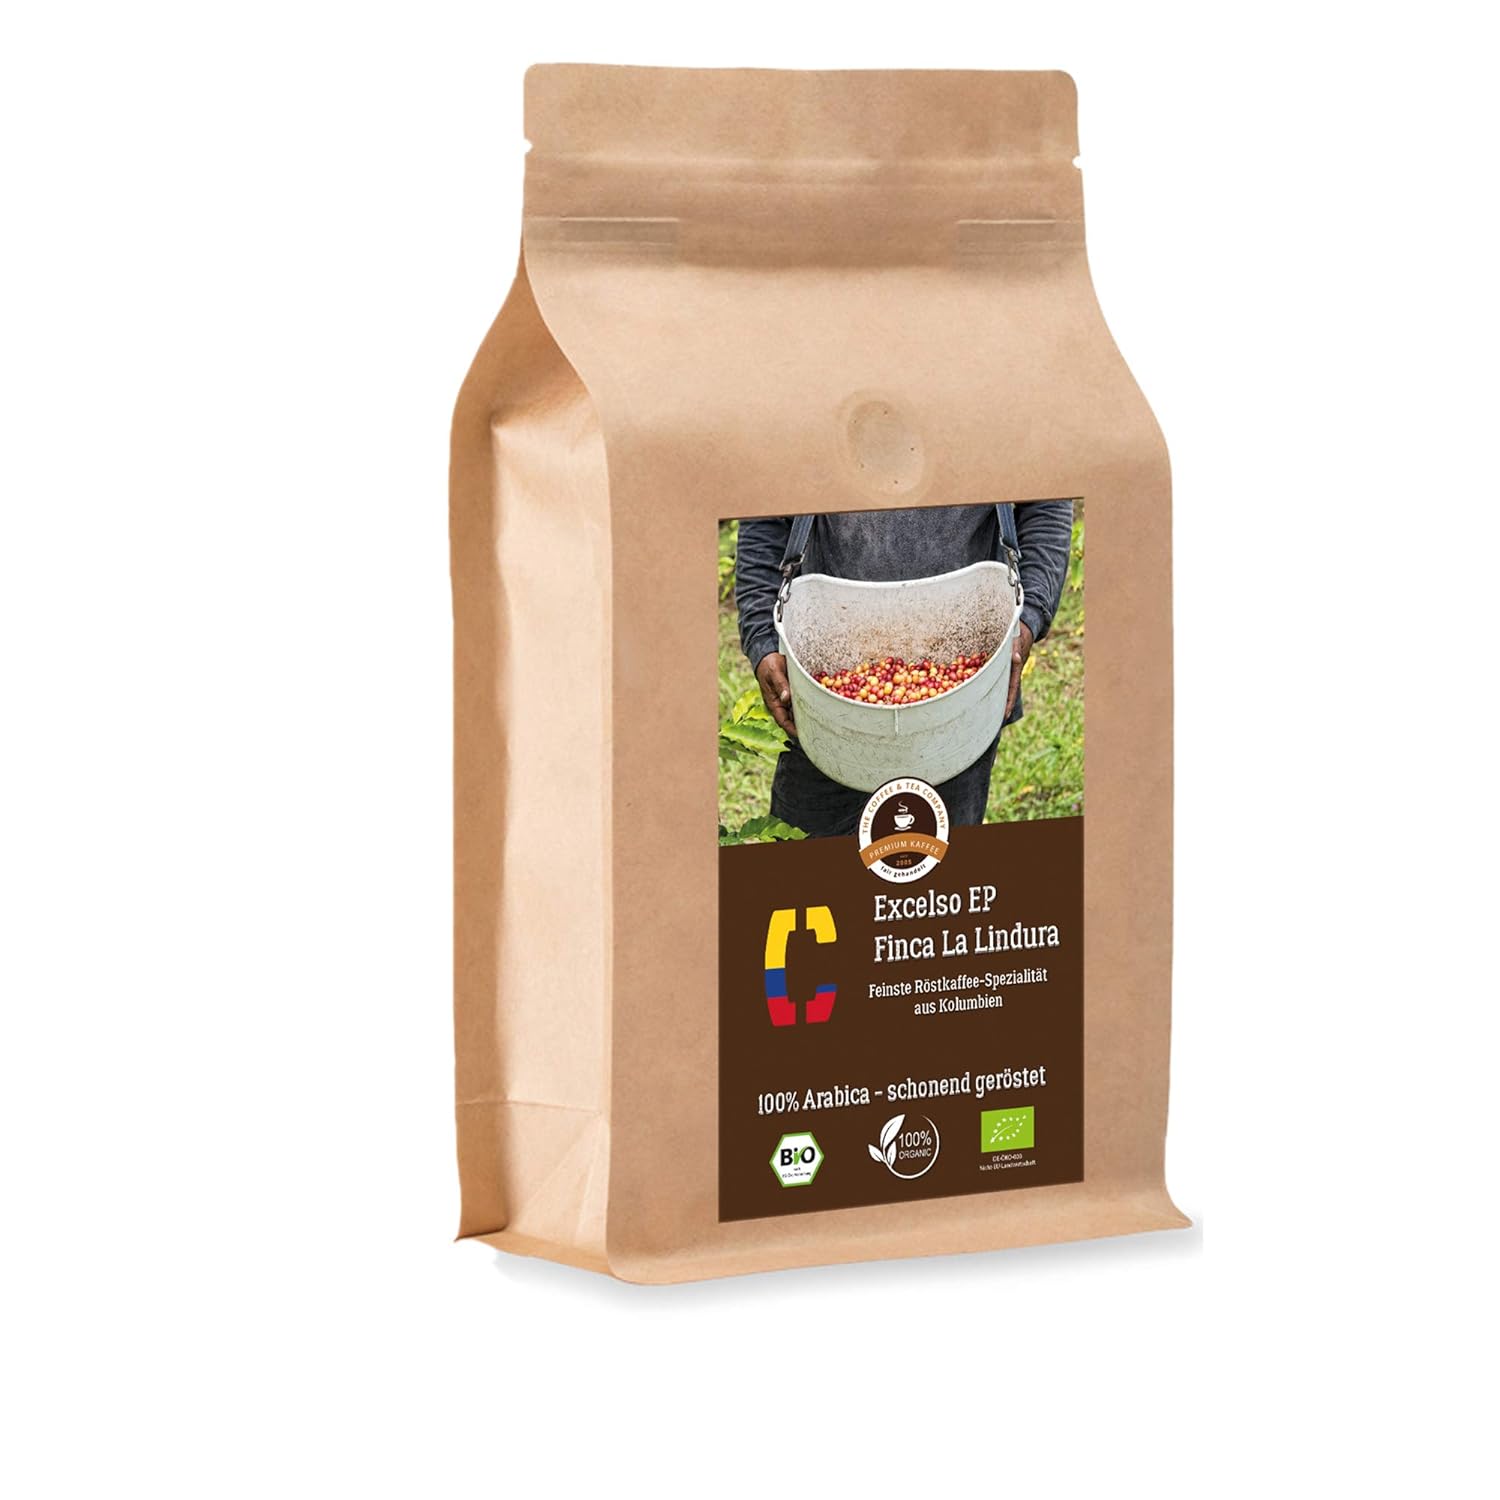 Coffee Globetrotter - Bio Colombia Excelso EP Finca la Lindura - 1000 g Very Fine Ground - for Fully Automatic Coffee Grinder, Hand Mill - Top Coffee - Roasted Coffee from Organic Cultivation